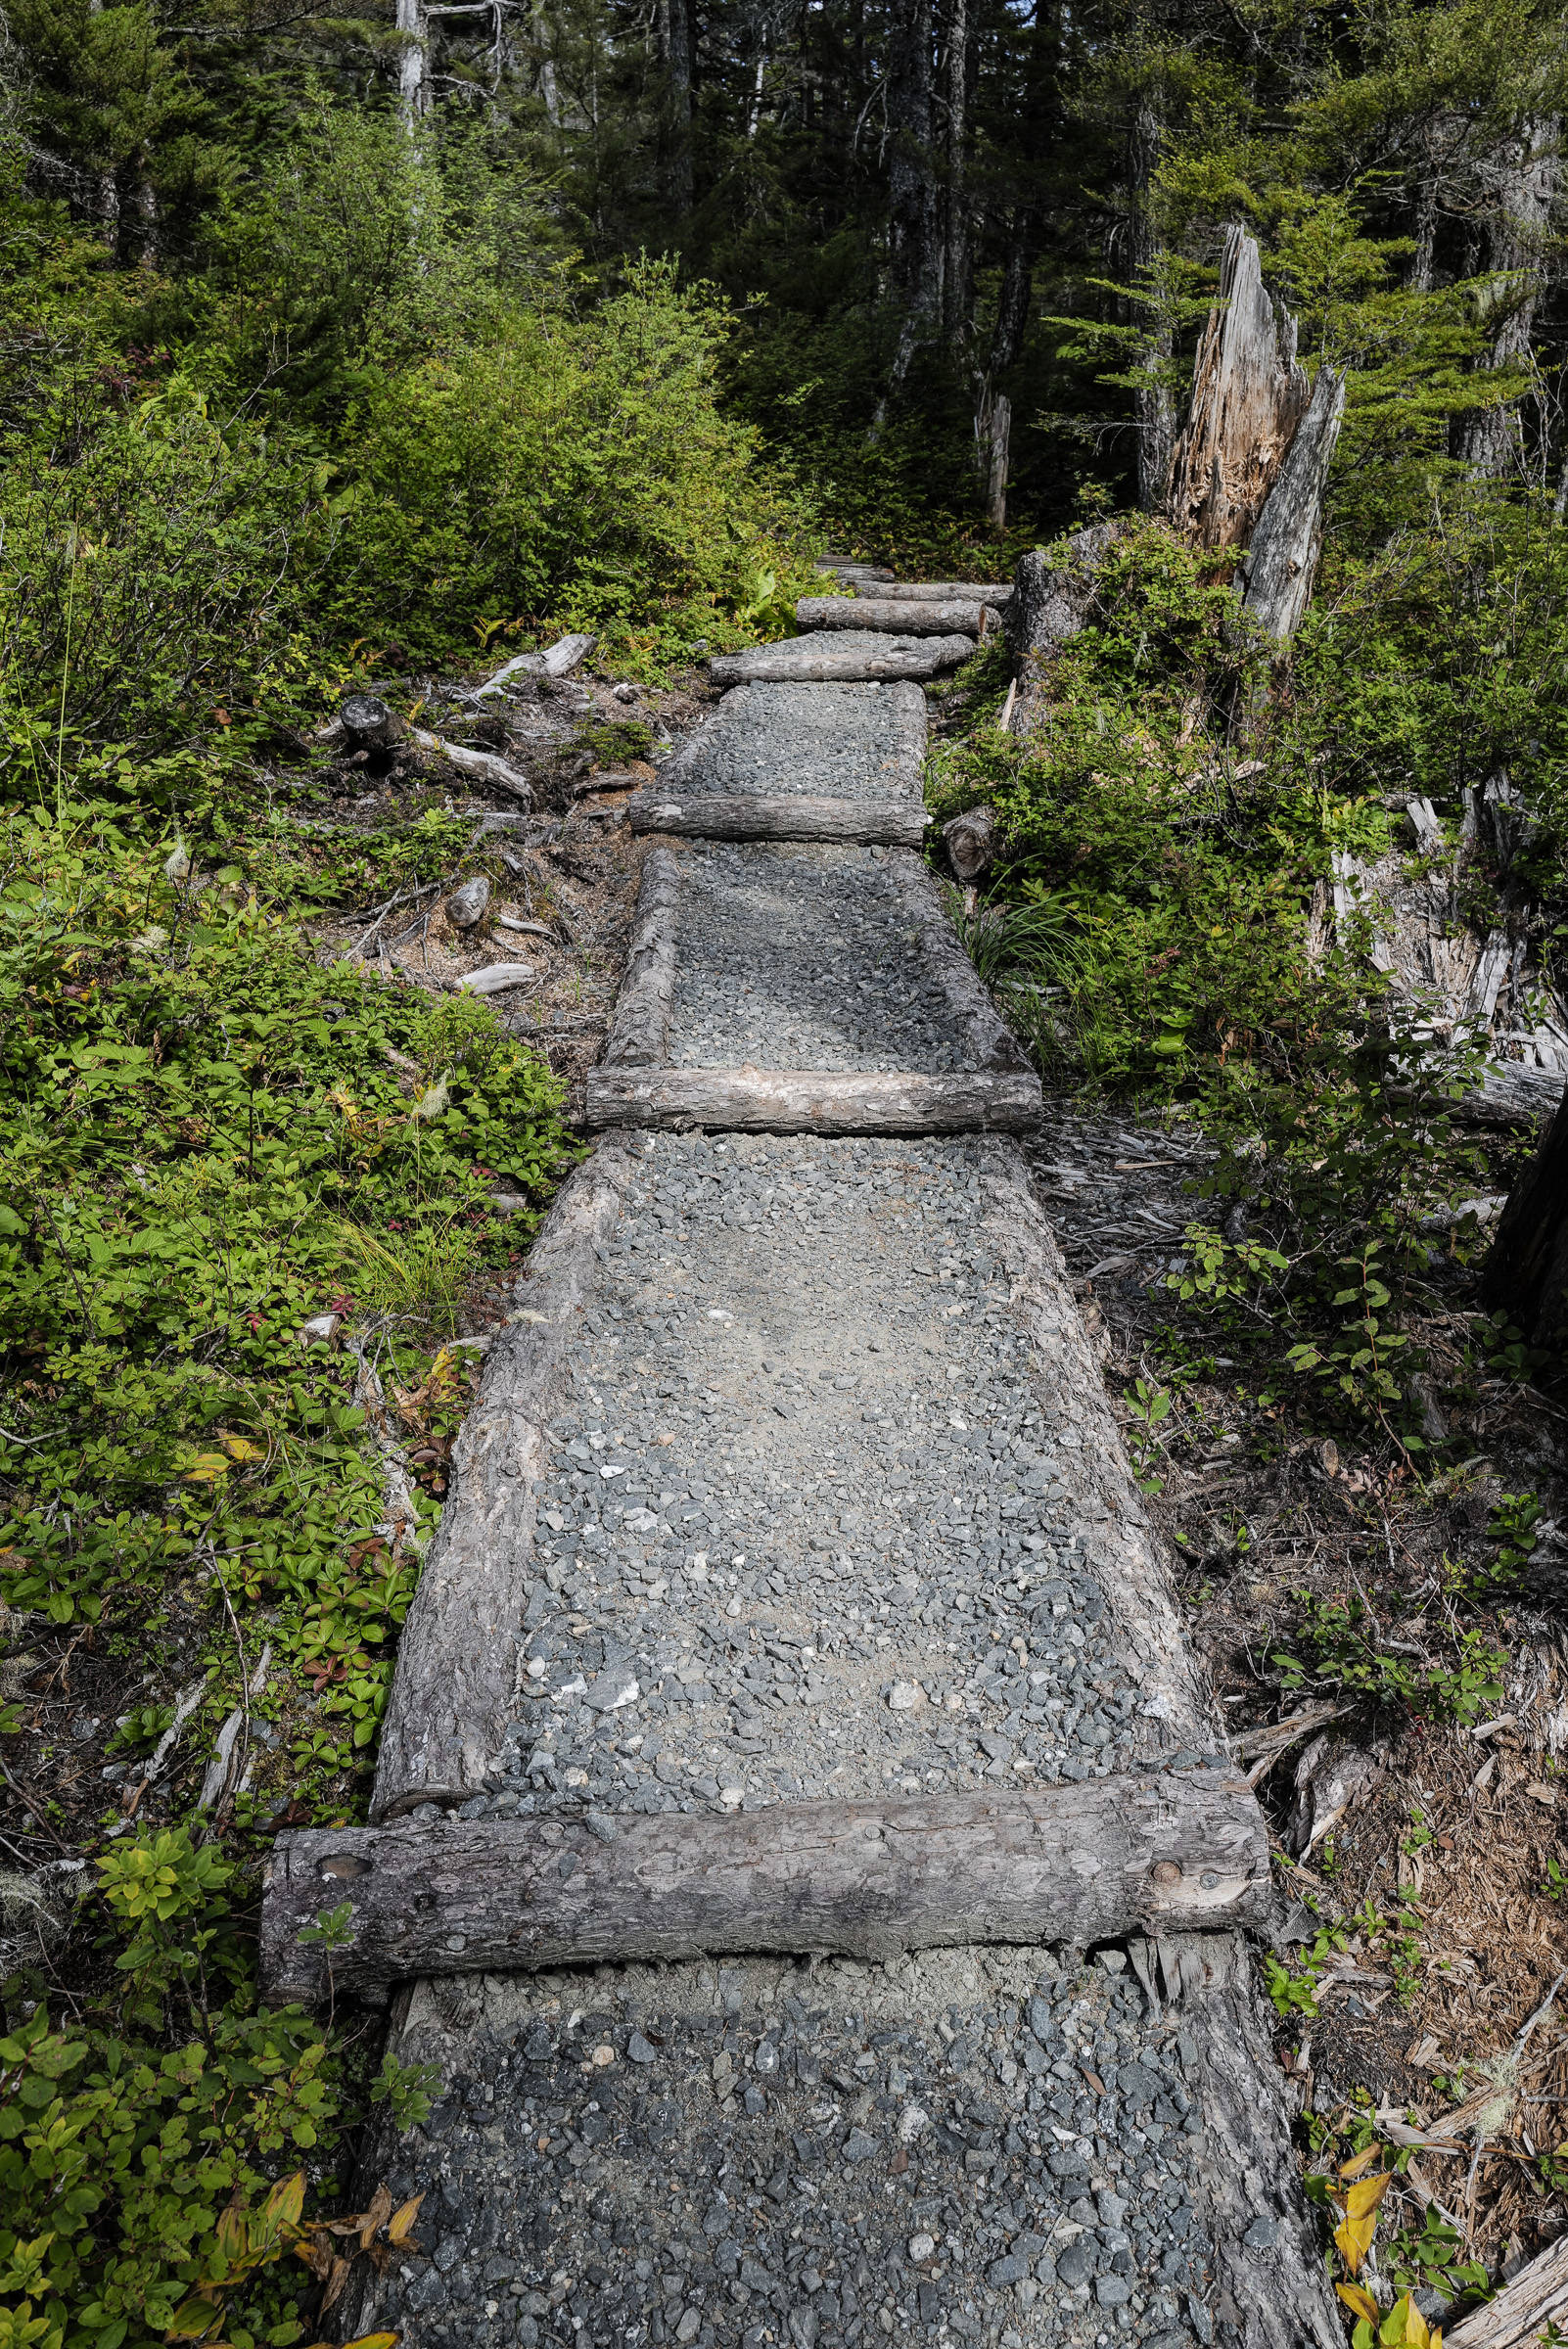 New turnpike construction on the Auke Nu Trail on the way to the John Muir Cabin on Wednesday, Aug. 7, 2019. (Michael Penn | Juneau Empire)